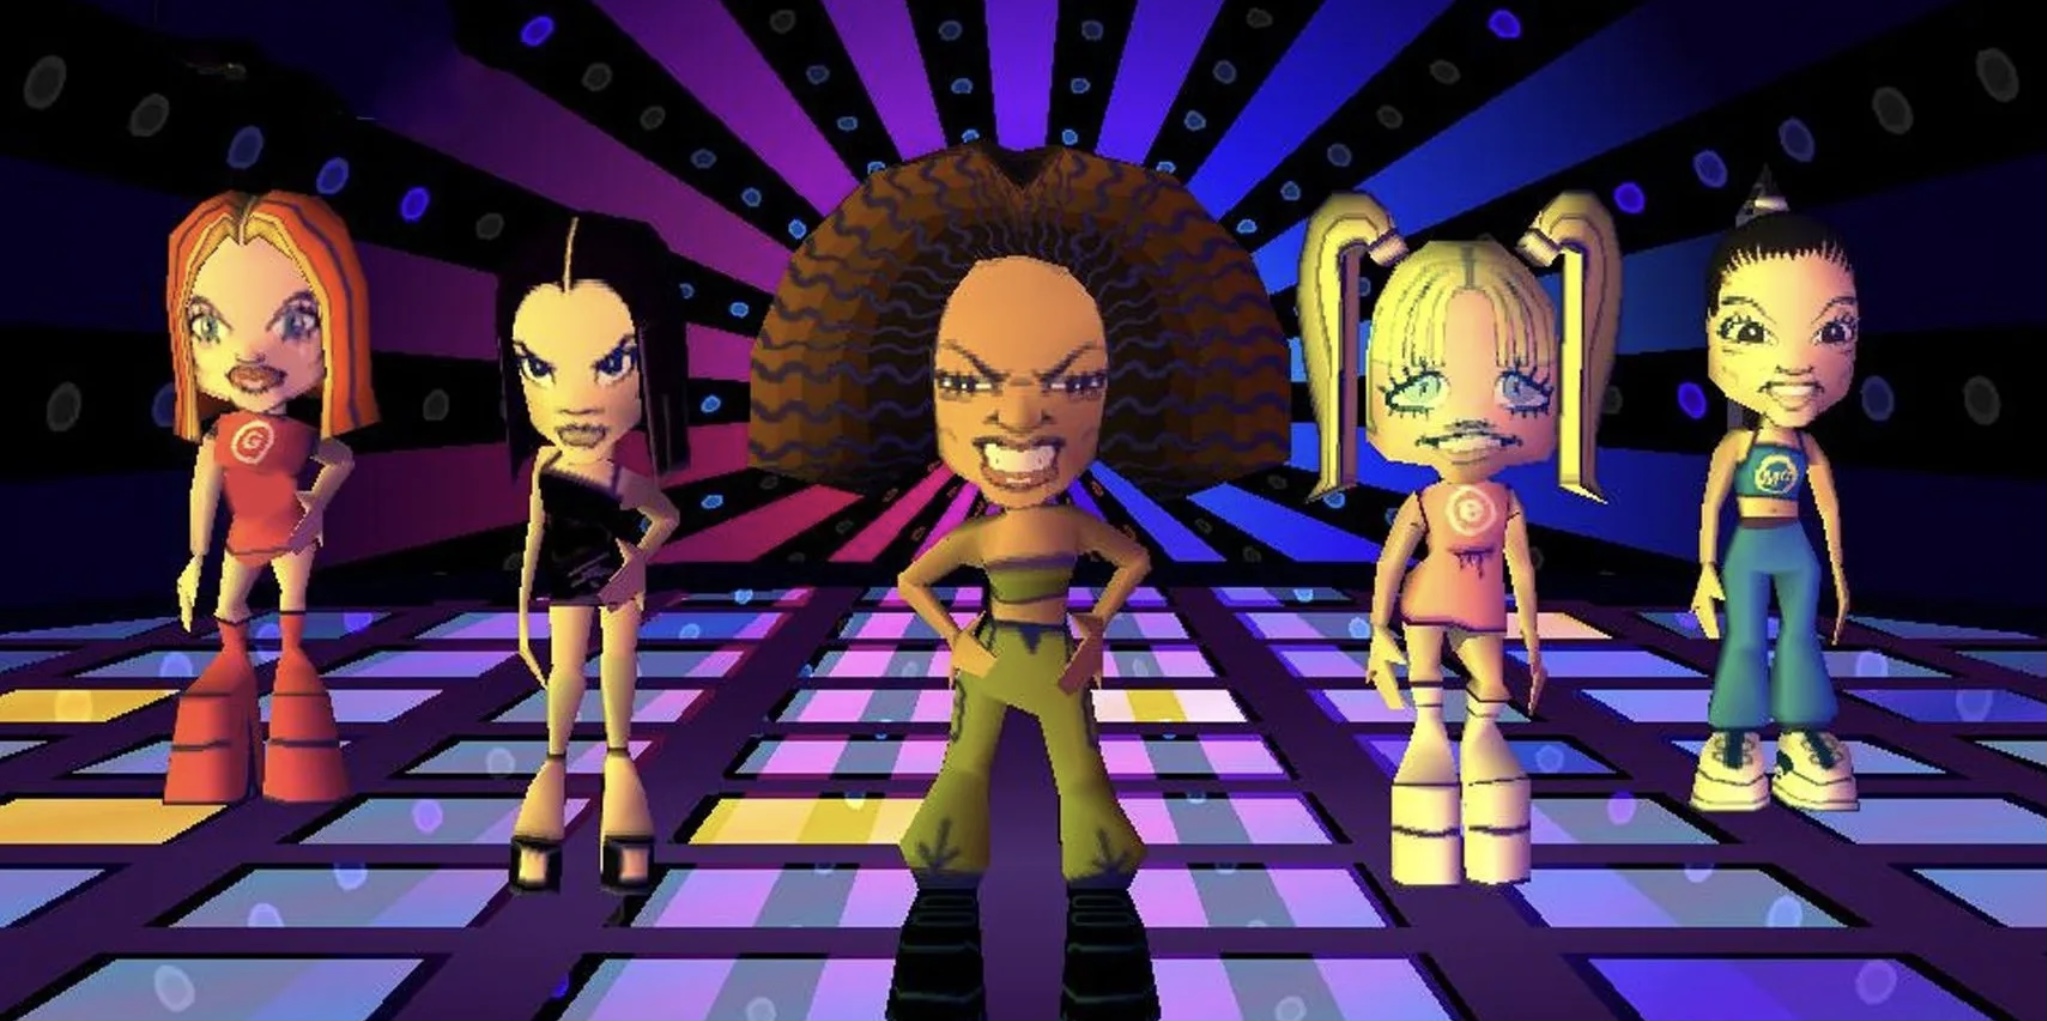 amina latif recommends game grumps spice world pic